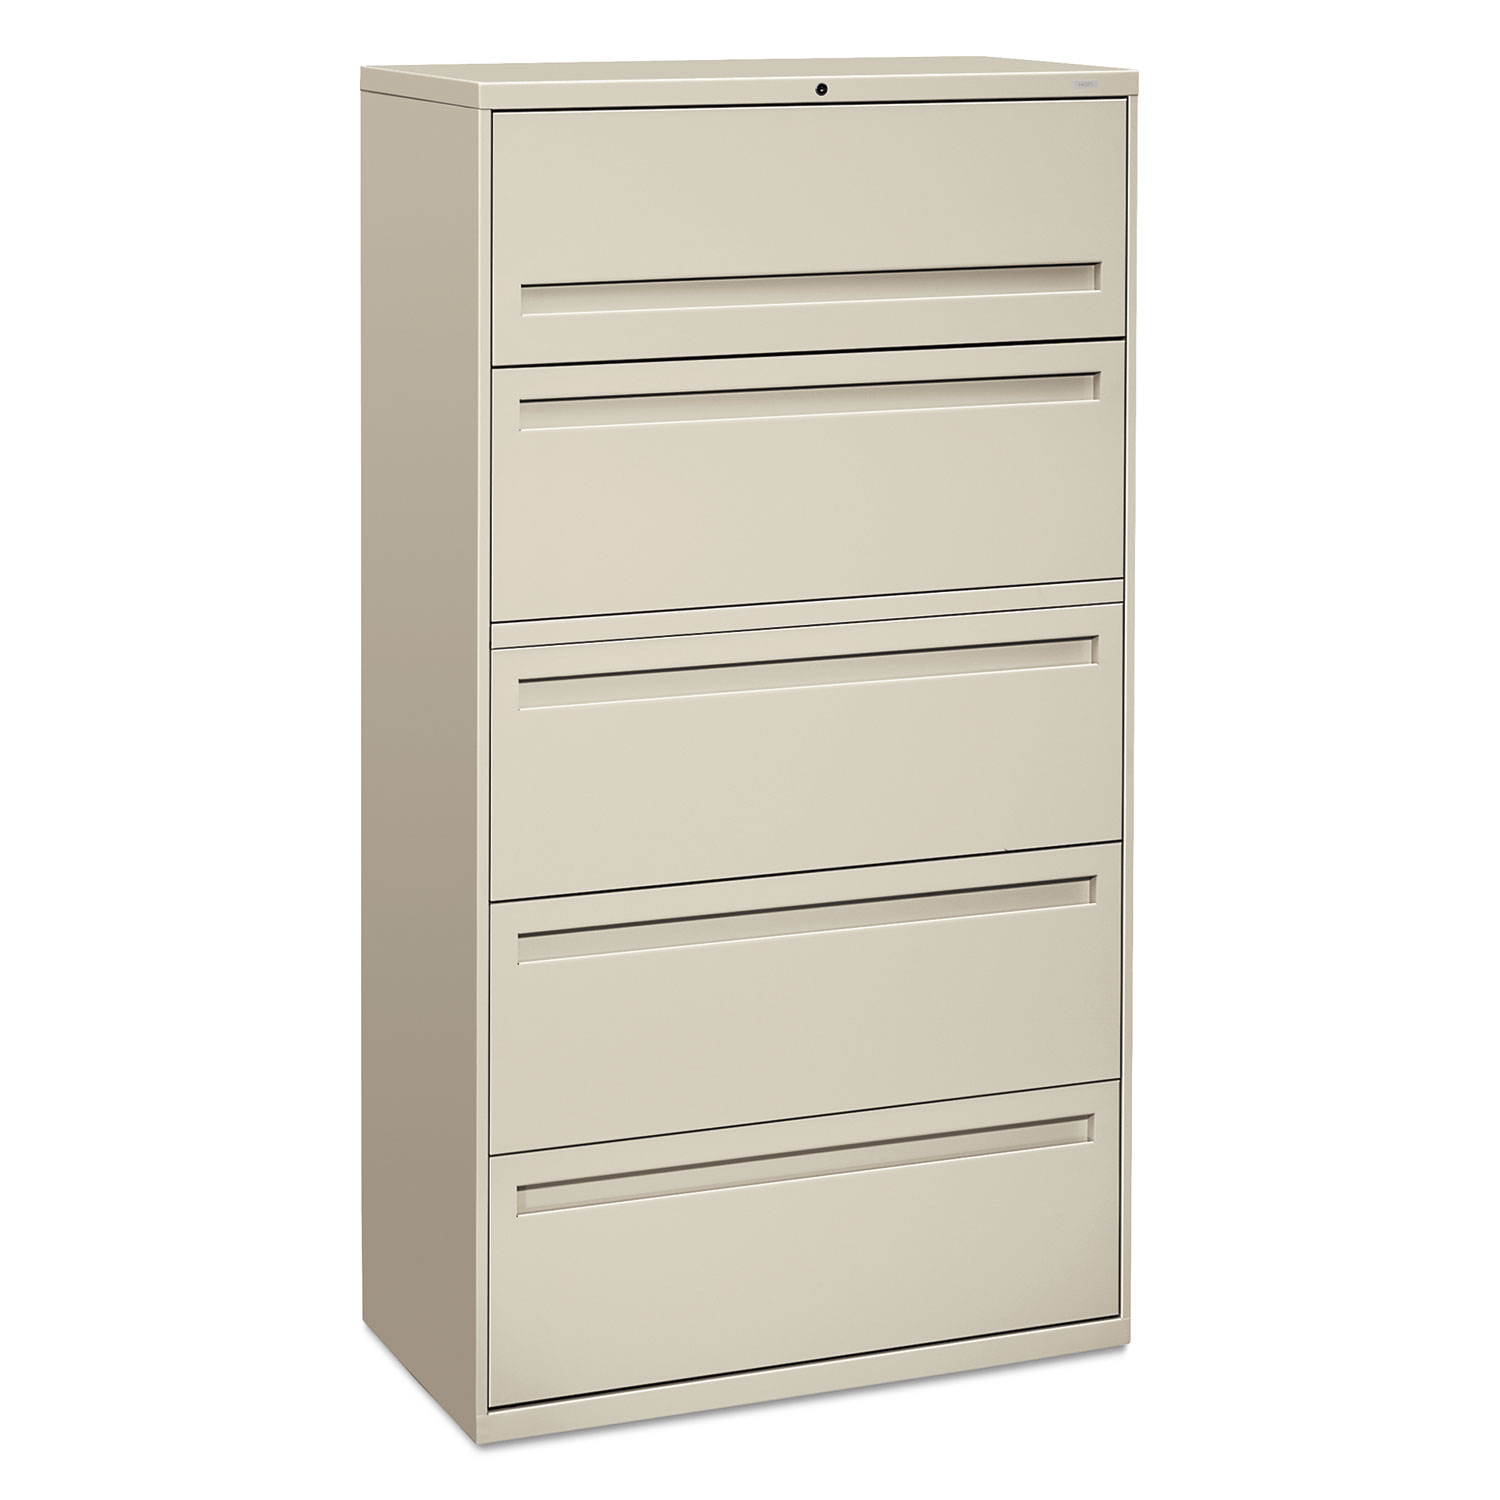 700 Series Five-Drawer Lateral File w/Roll-Out Shelf, 36w x 18d x 64 1/4h, Light Gray